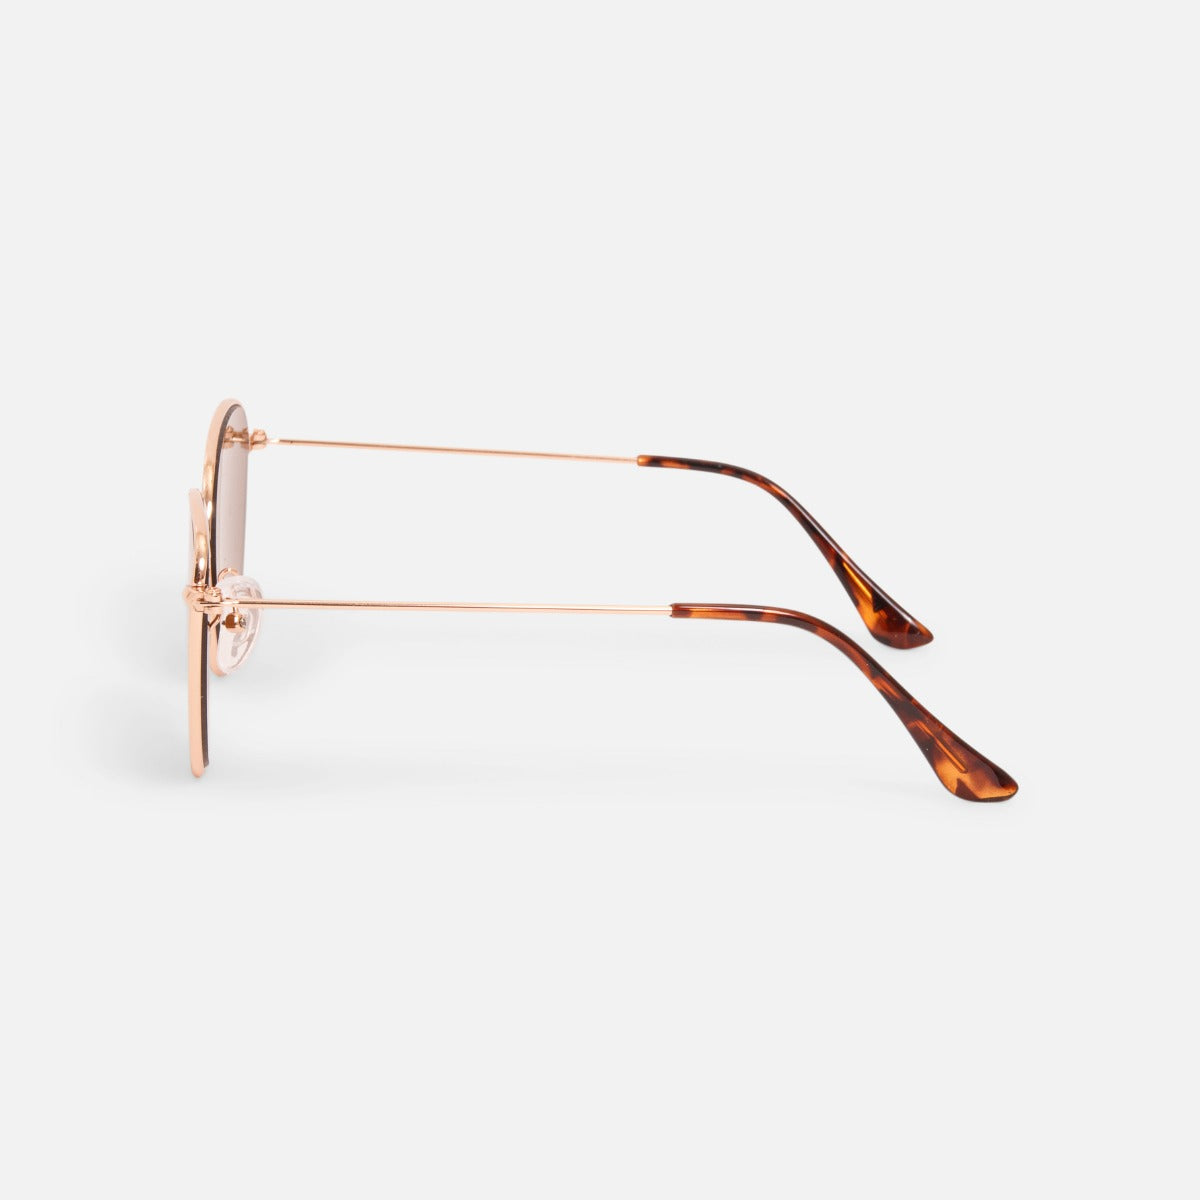 Aviator sunglasses with tortoise print and thin branches